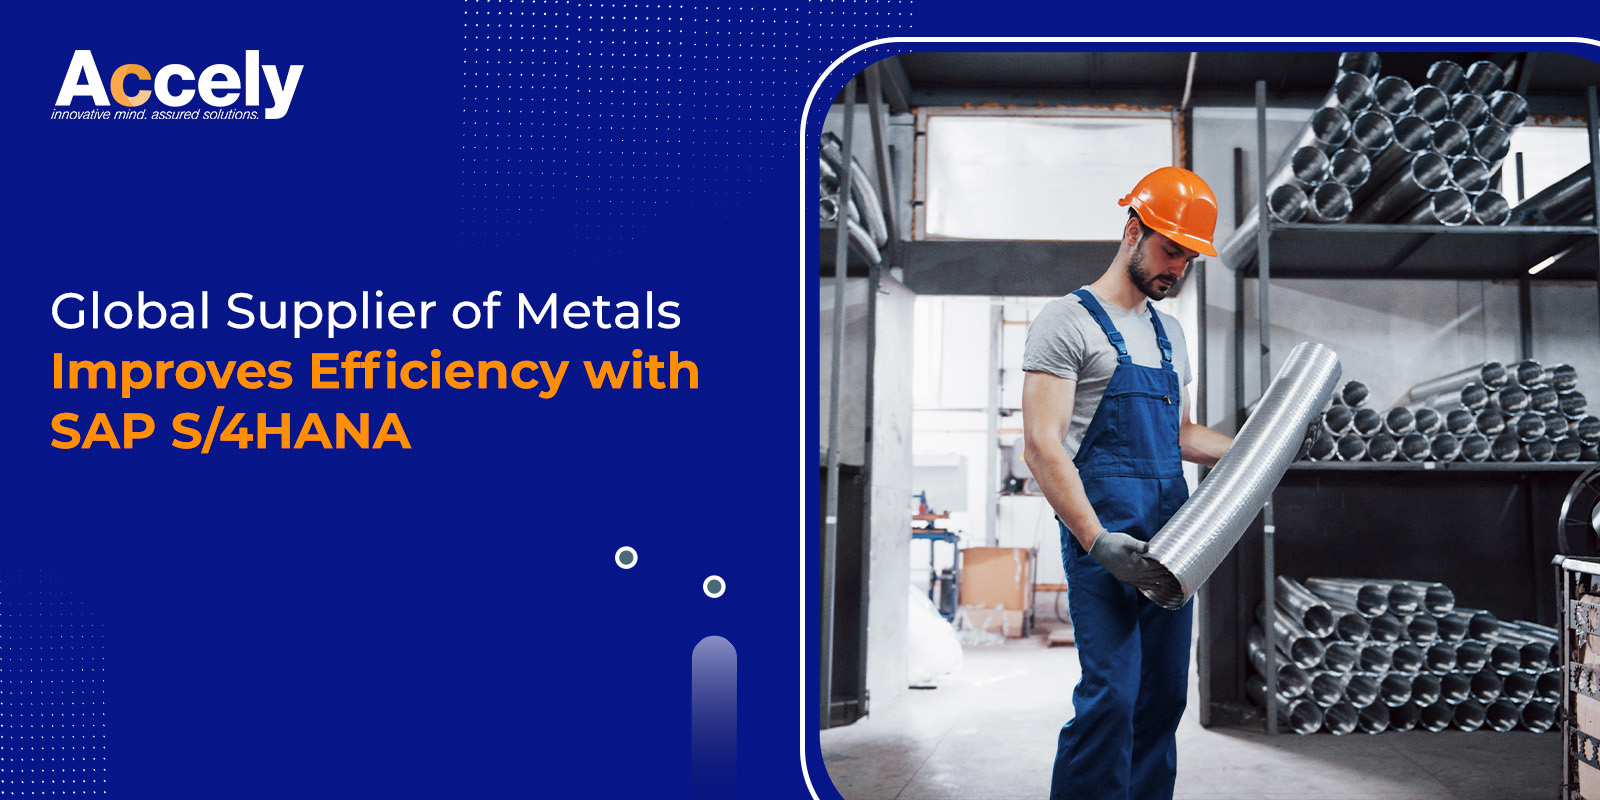 Global Supplier of Metals Improves Efficiency with SAP S/4HANA